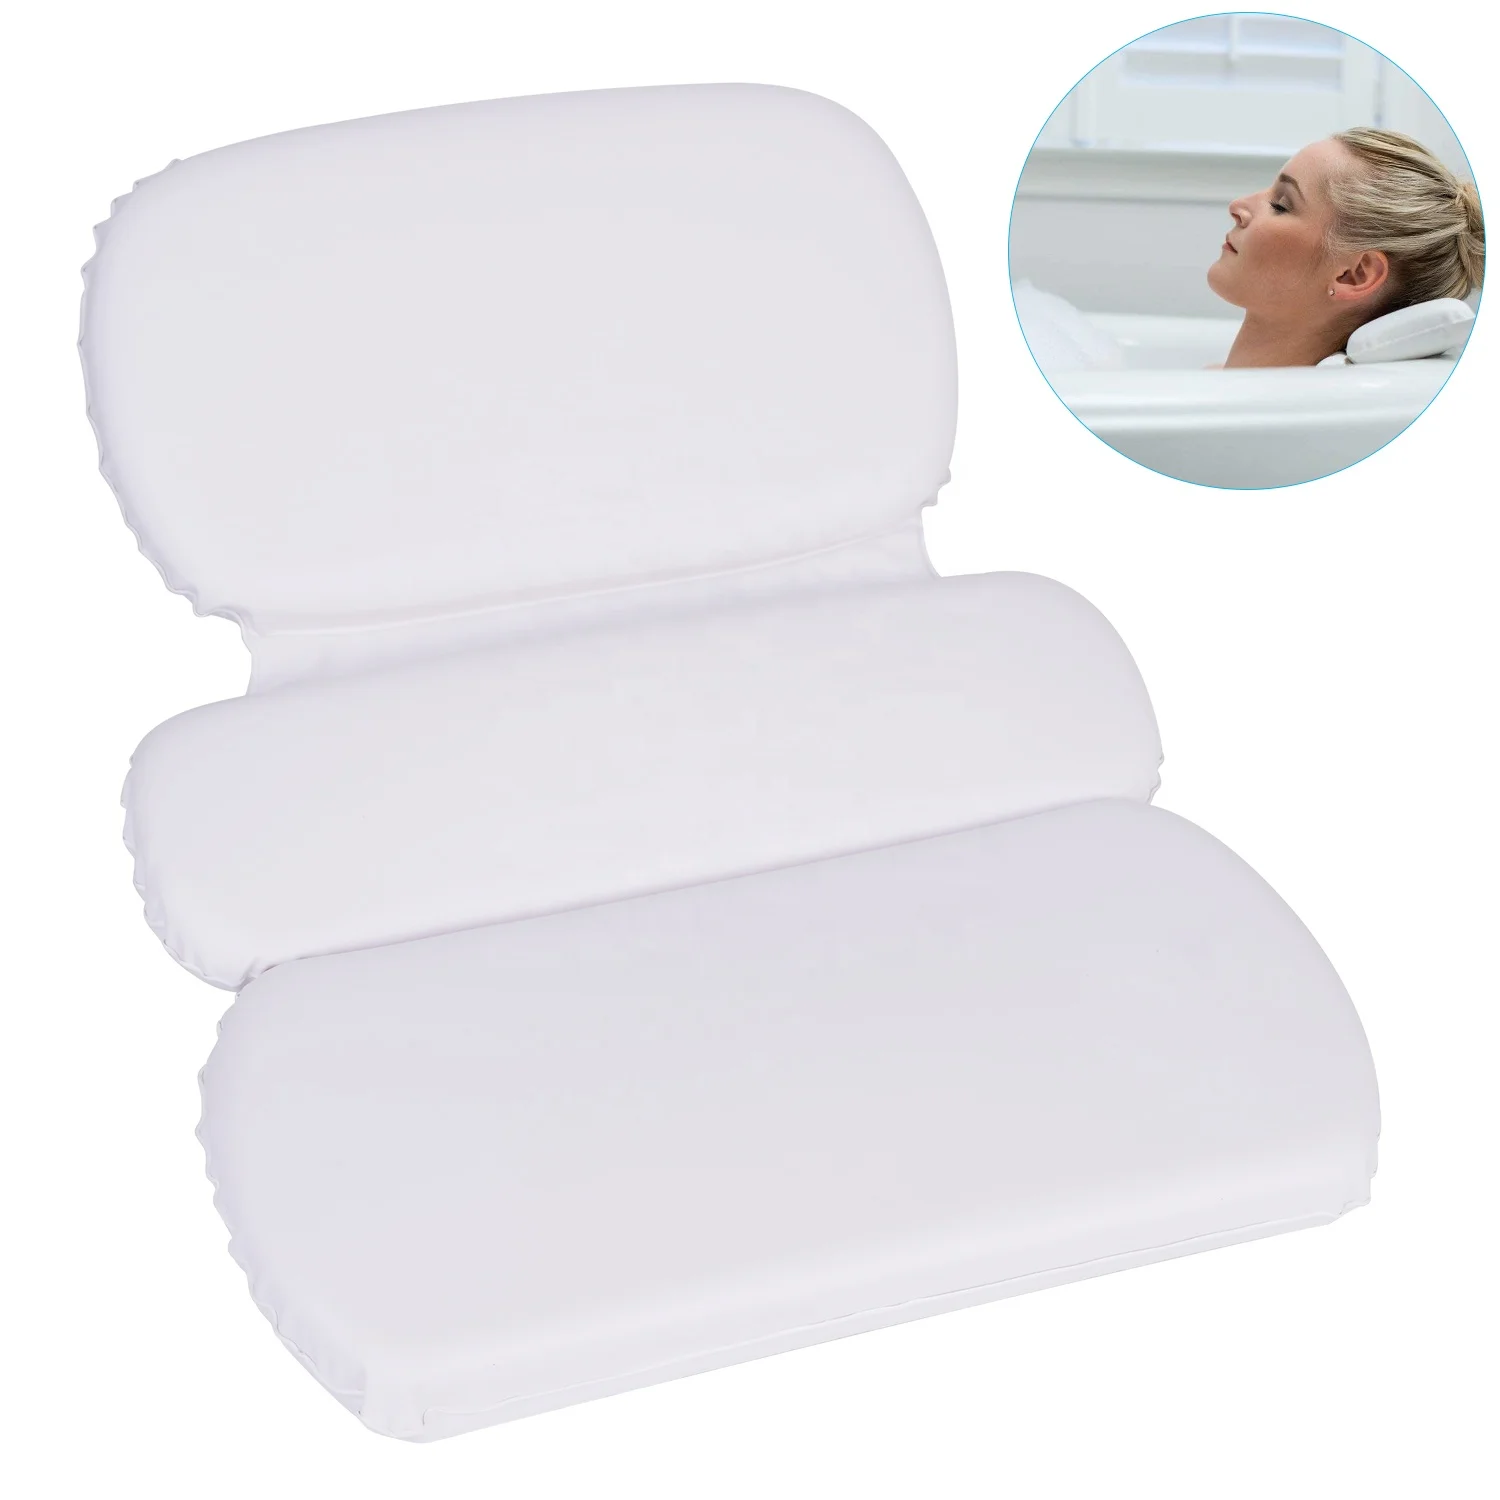 Factory made Bath Tub Neck Pillow with Suction Cups, Waterproof, 3 Panel bath spa pillow neck suction